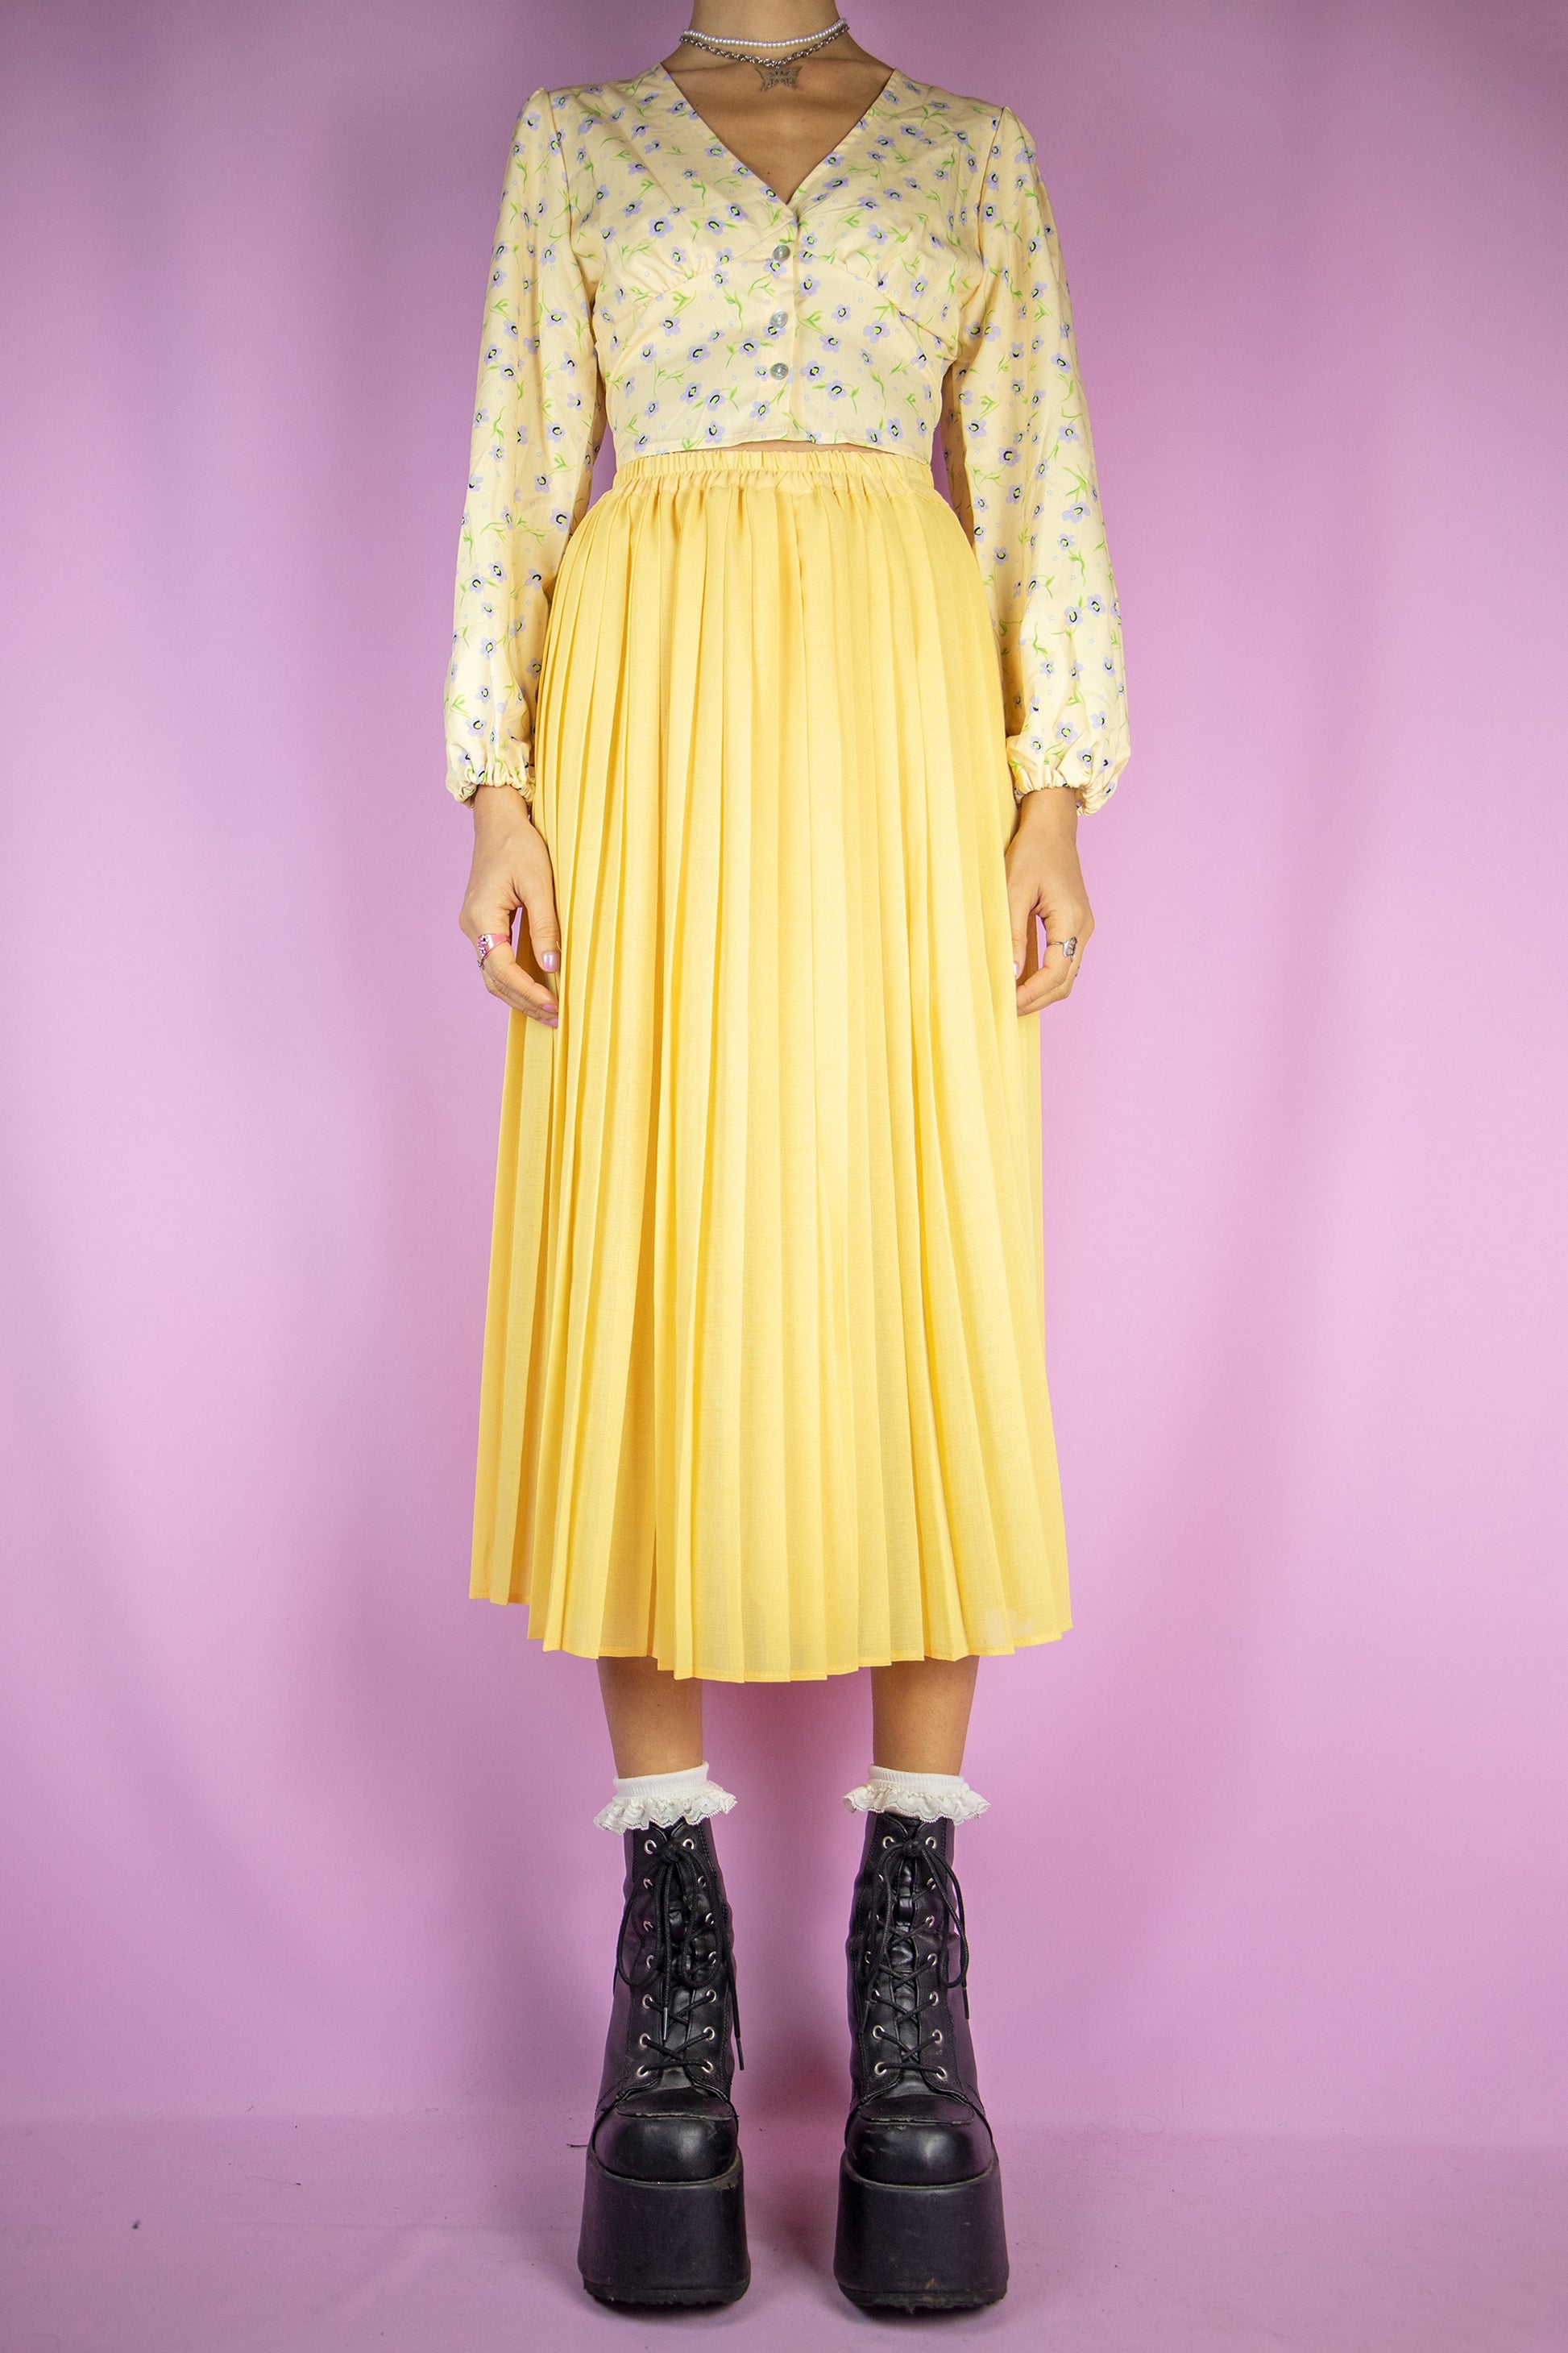 The Vintage 90s Yellow Pleated Midi Skirt is a long pleated yellow skirt with an elasticated waist. Classic preppy 1990s maxi skirt.